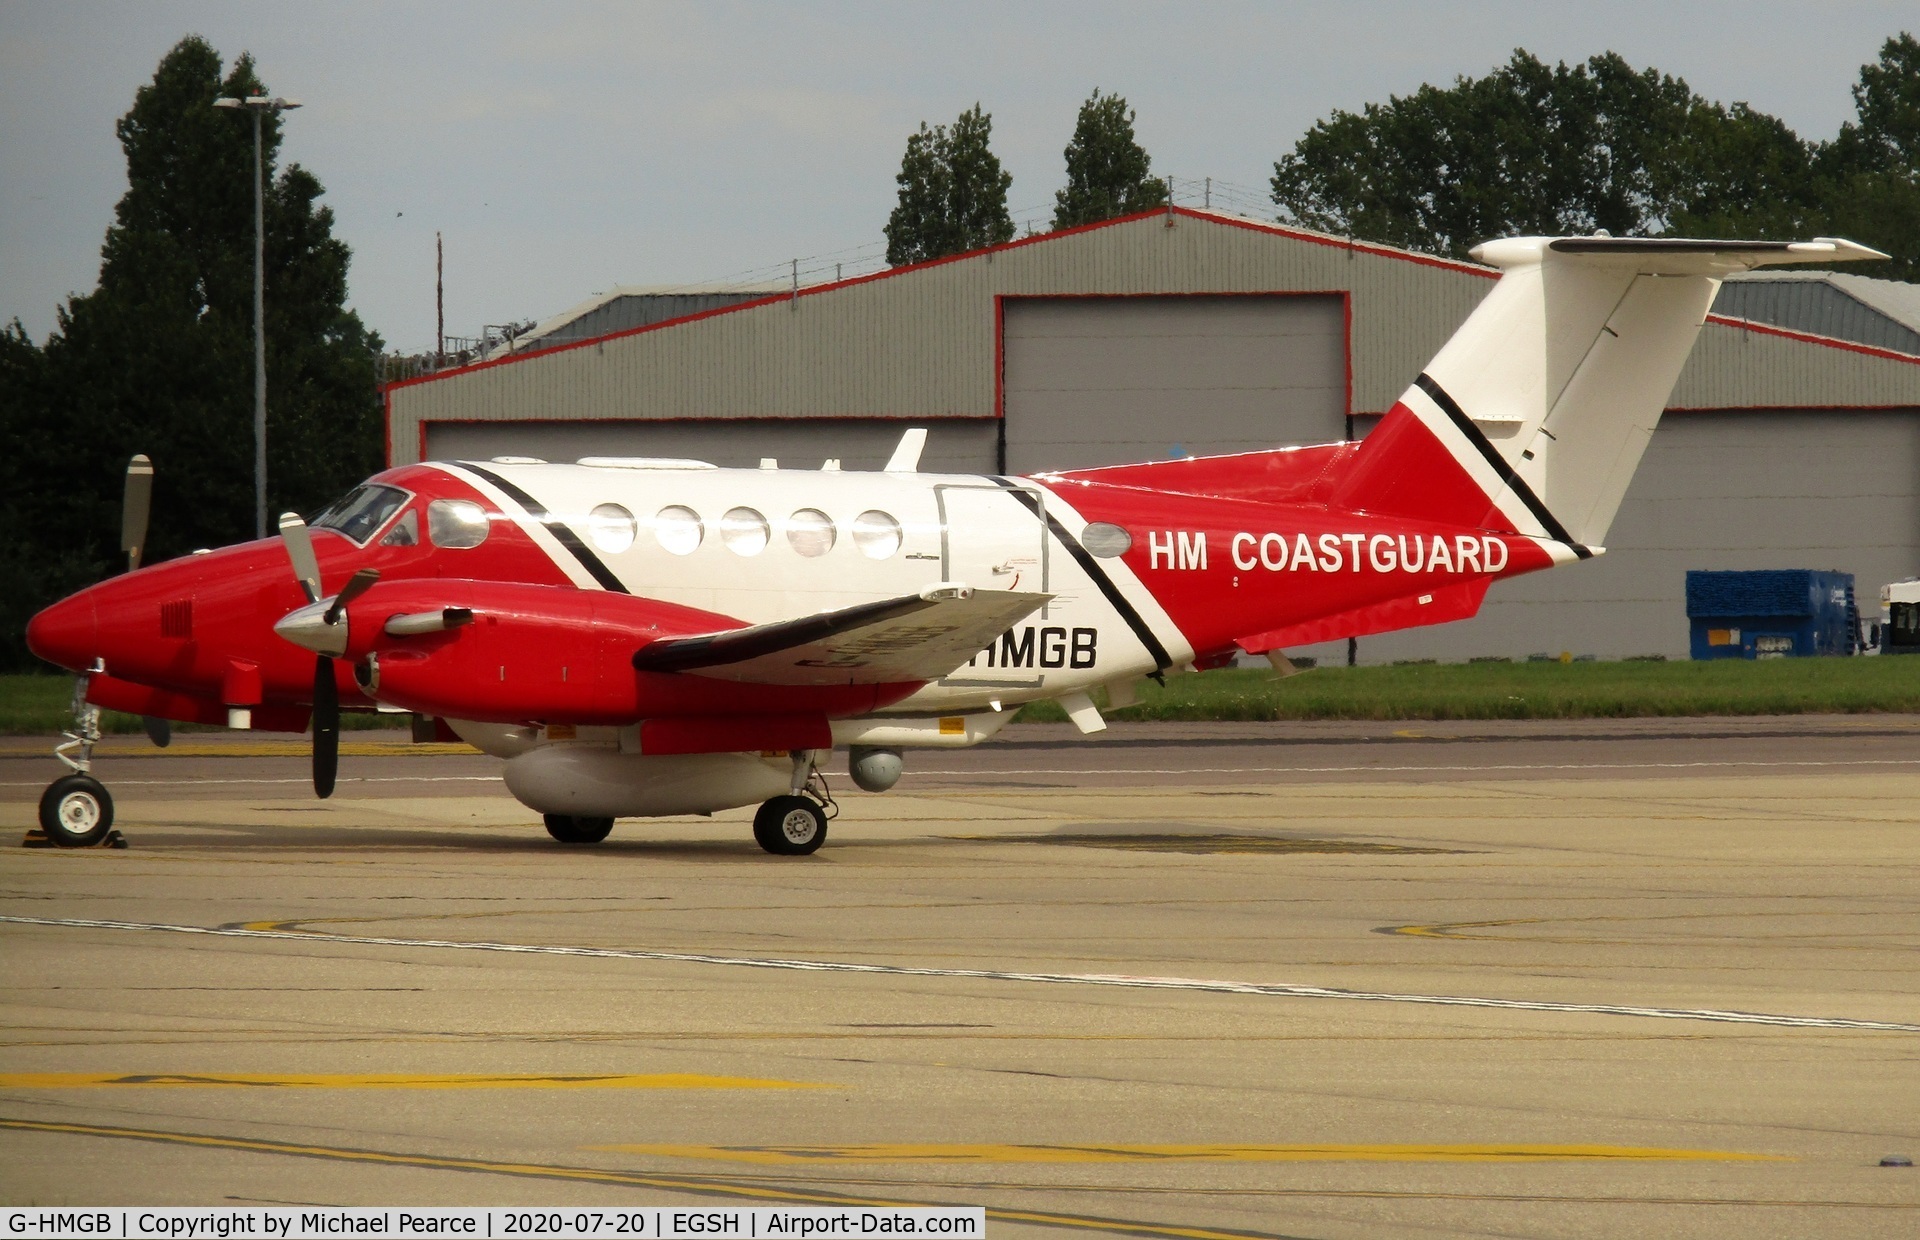 G-HMGB, 1980 Beech 200 Super King Air C/N BB-752, Parked on the SaxonAir ramp for refuel, whilst on a coastguard mission.